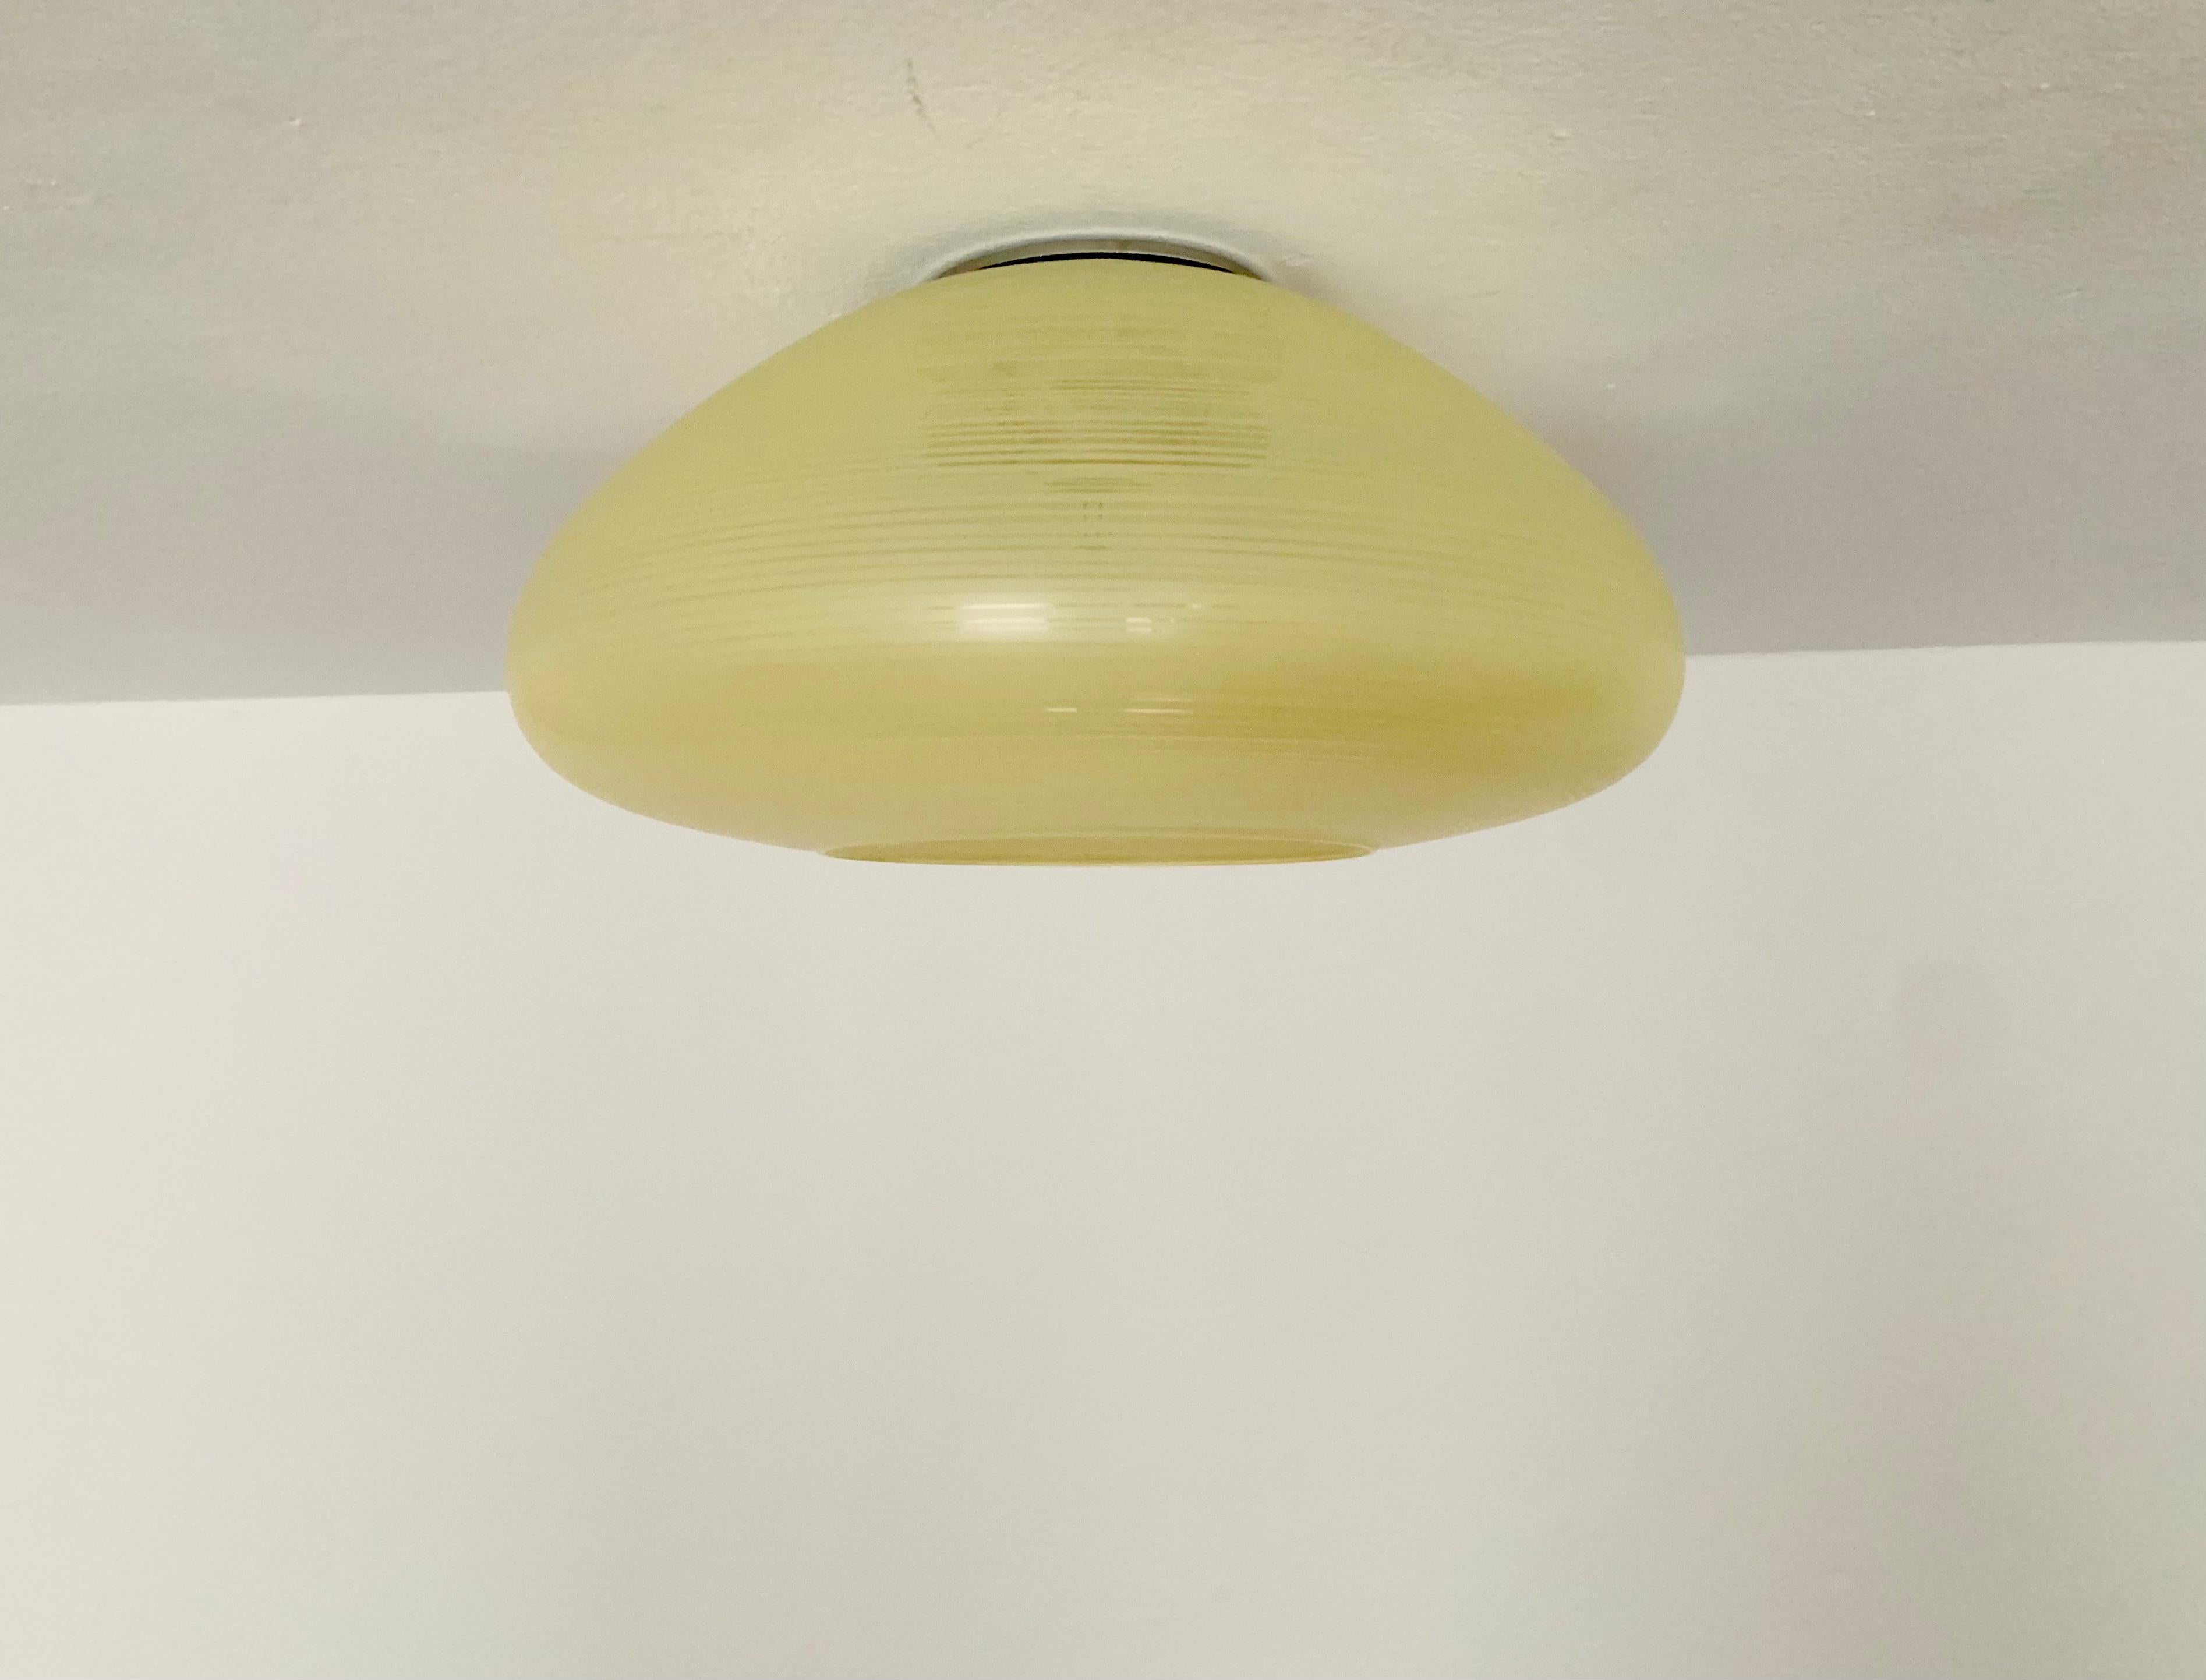 Exceptionally beautiful and very rare ceiling lamp from the 1950s.
The great stripe pattern spreads a very pleasant light and makes the lamp very special.
Very fine and beautiful design which fits wonderfully into any room.
Very rare in this